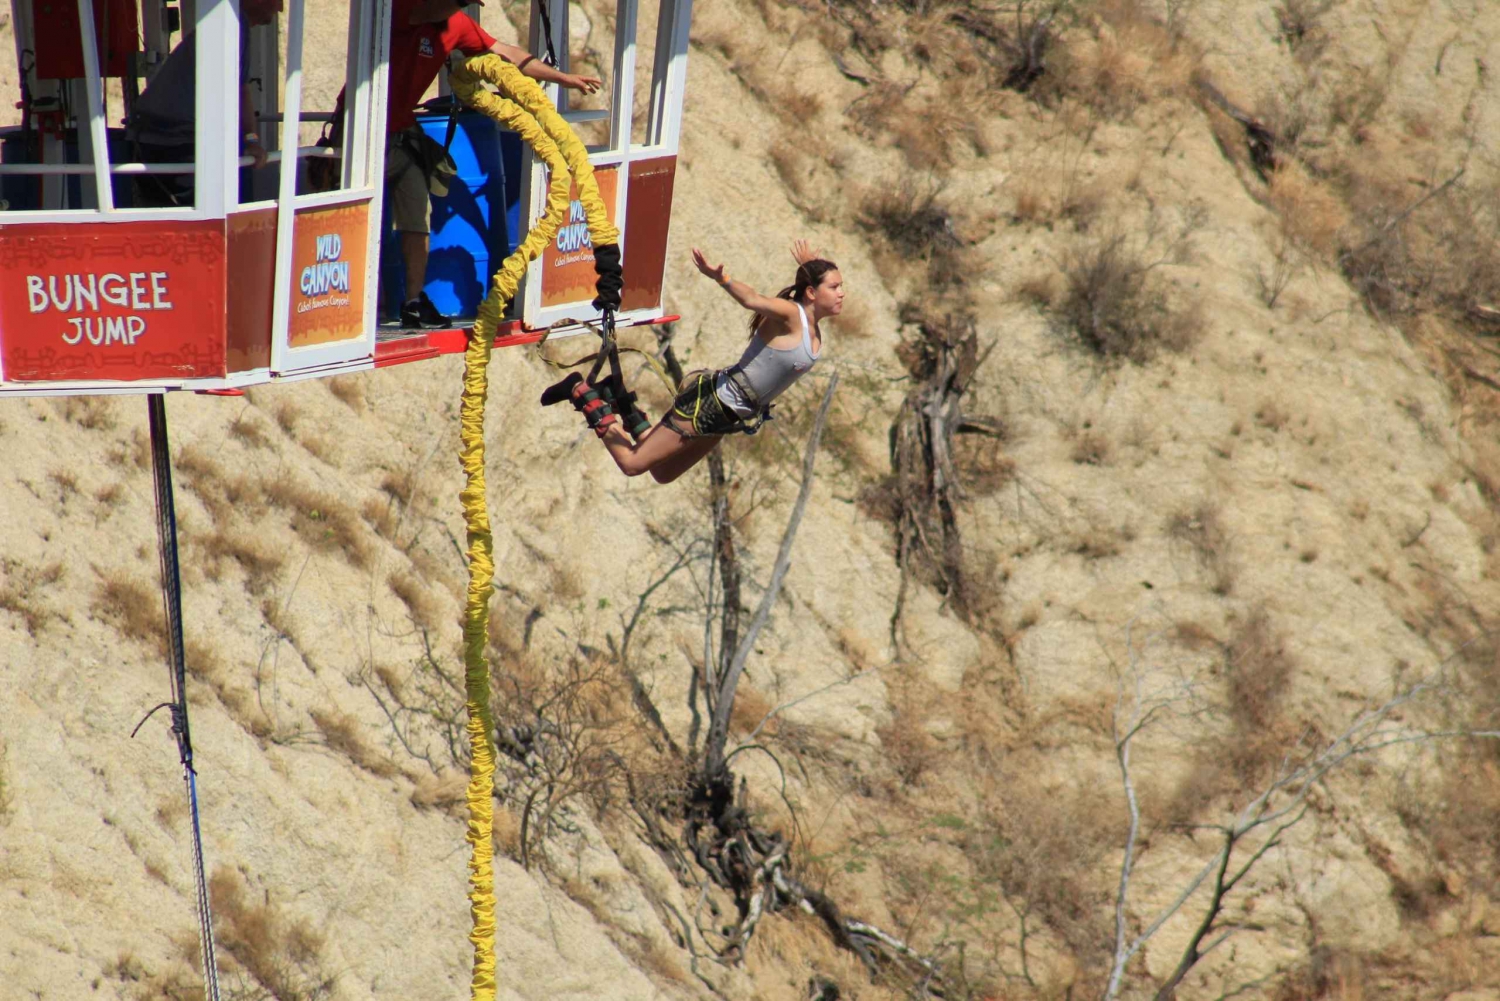 Los Cabos: 3.5 Hour Canyon Jump from Glass Floor Gondola